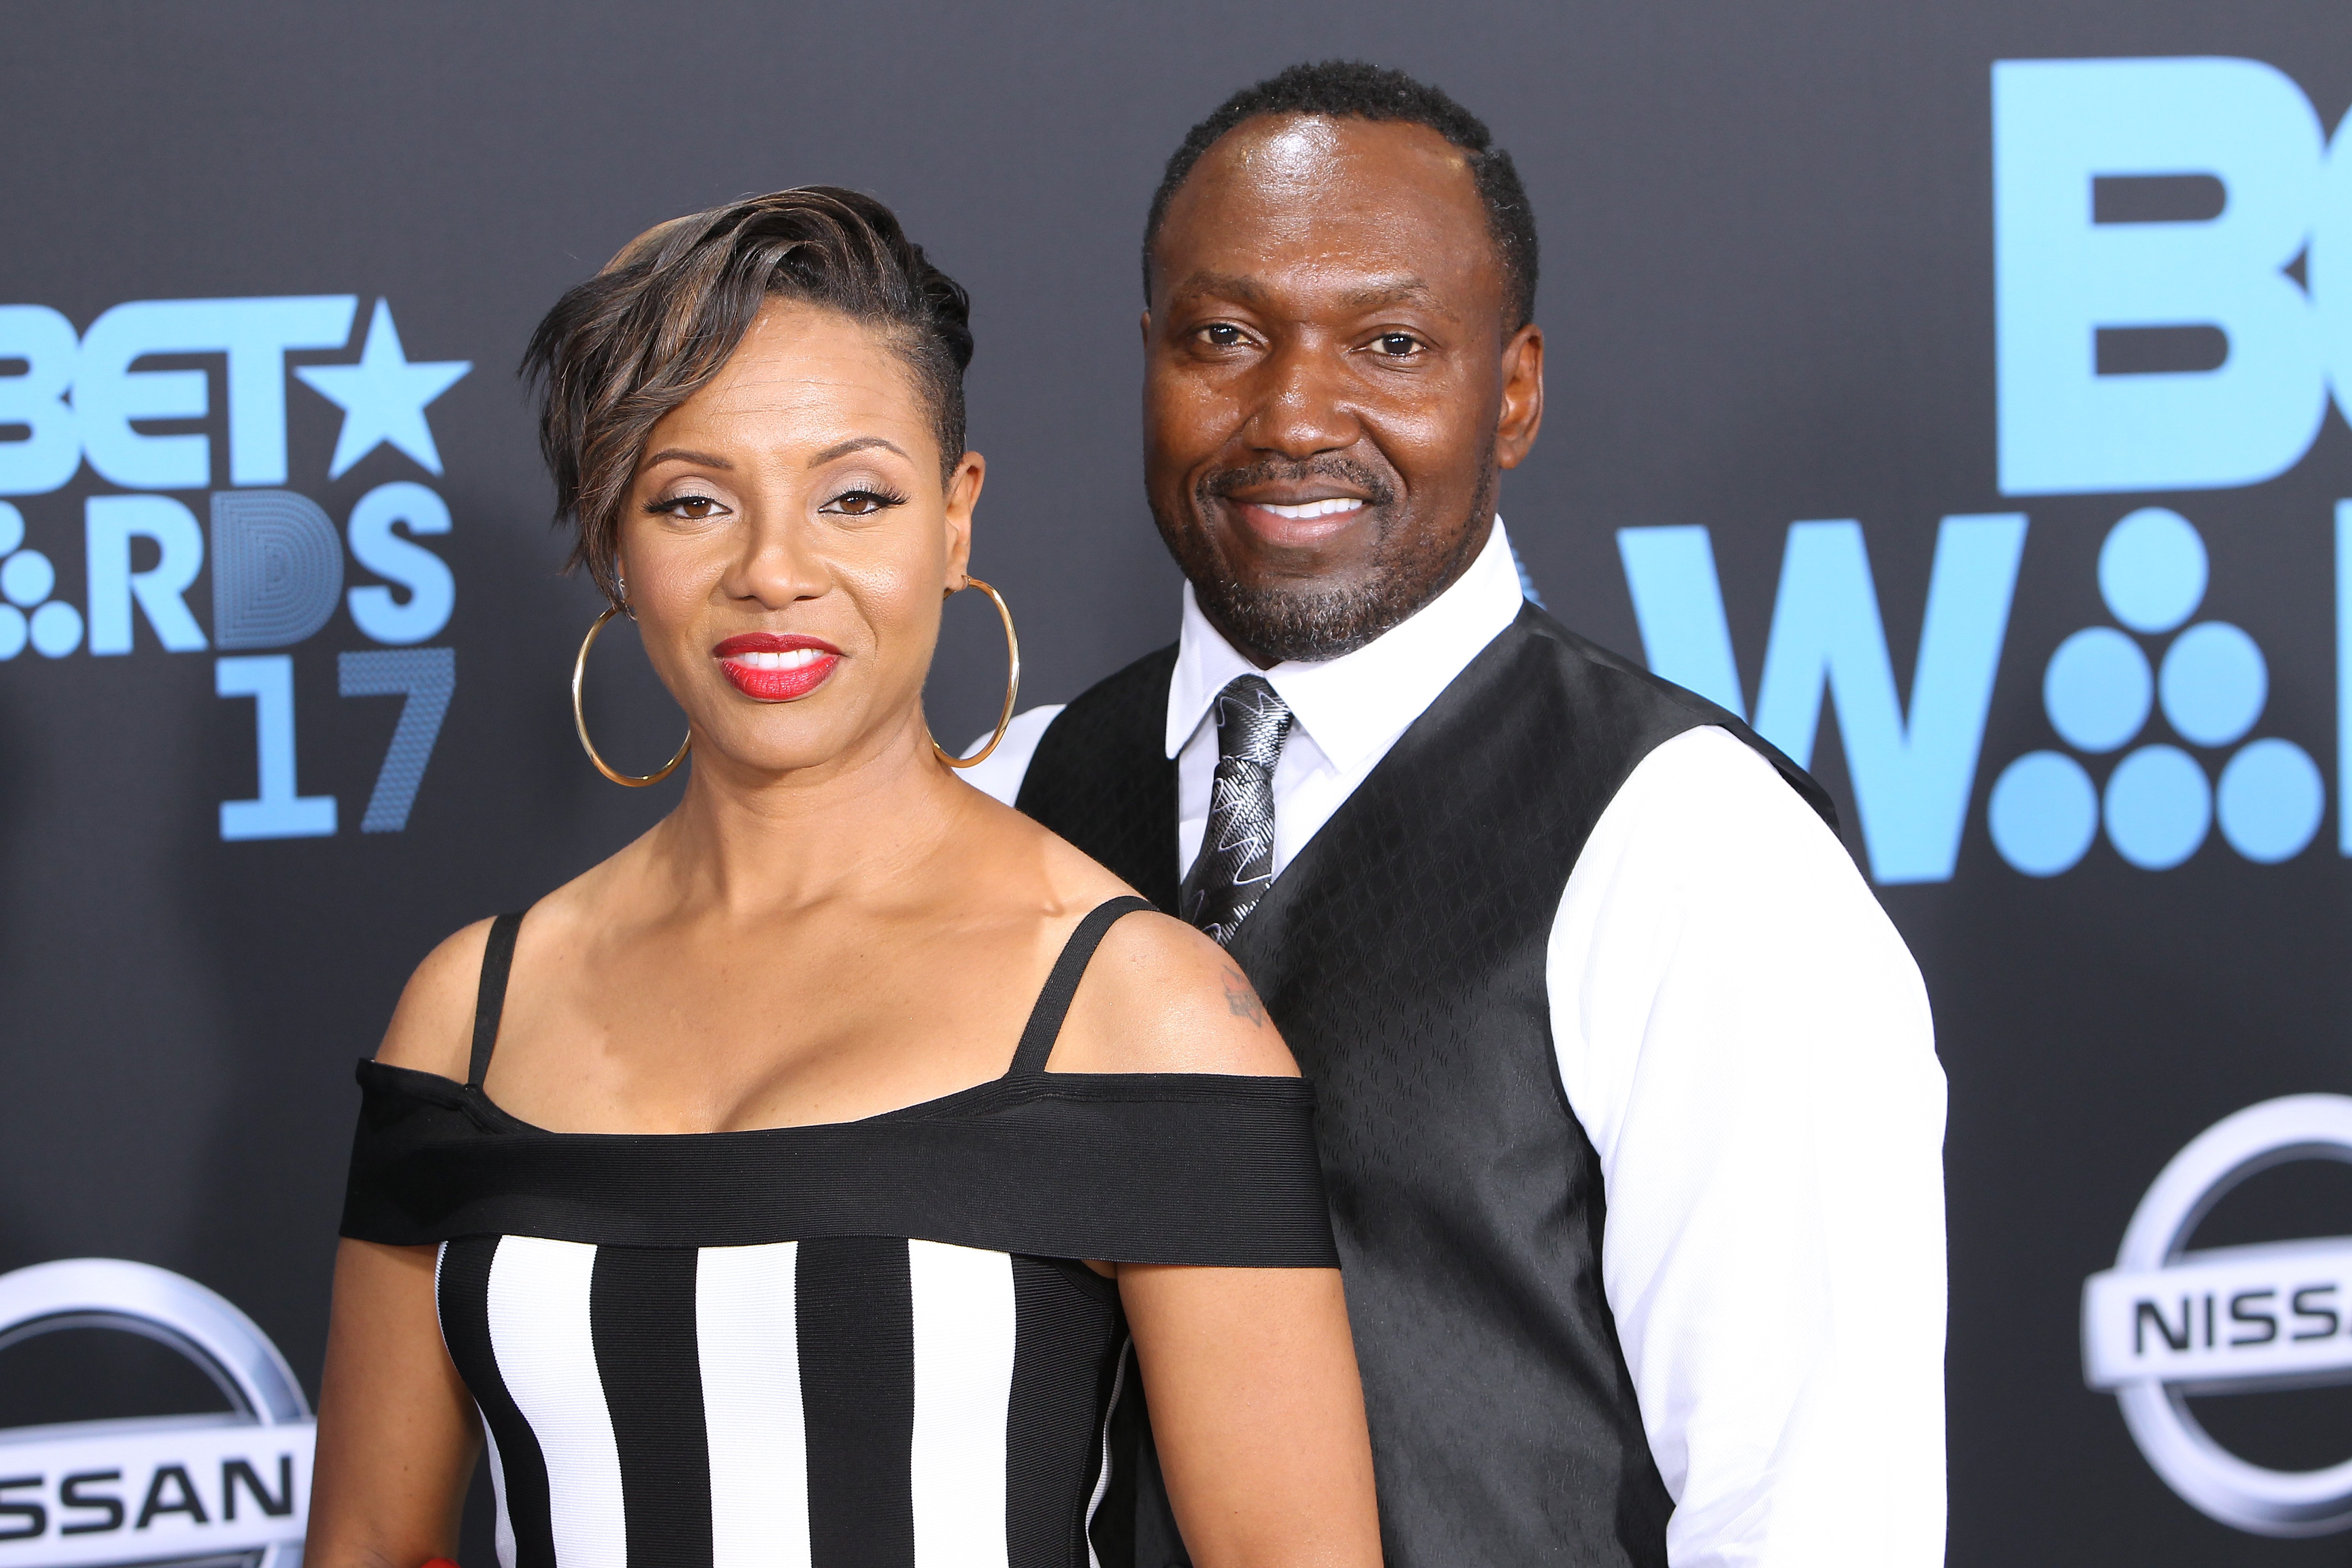 MC Lyte and husband John Wyche at the 2017 BET Awards. | Photo: Getty Images